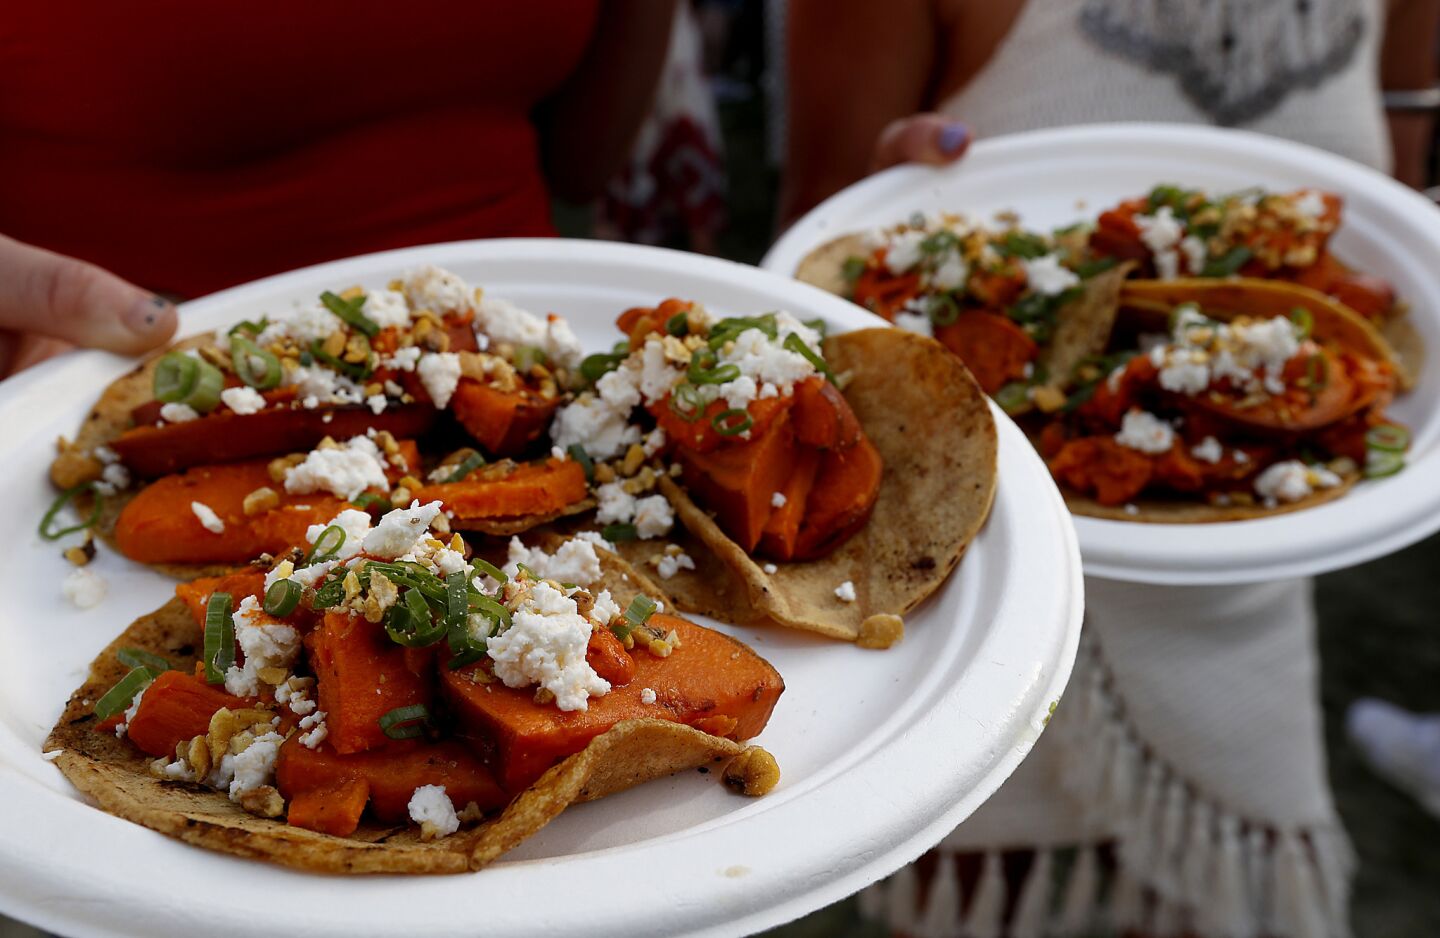 Guerrilla Tacos offers sweet potato tacos at the 2018 Coachella Valley Music and Arts Festival.